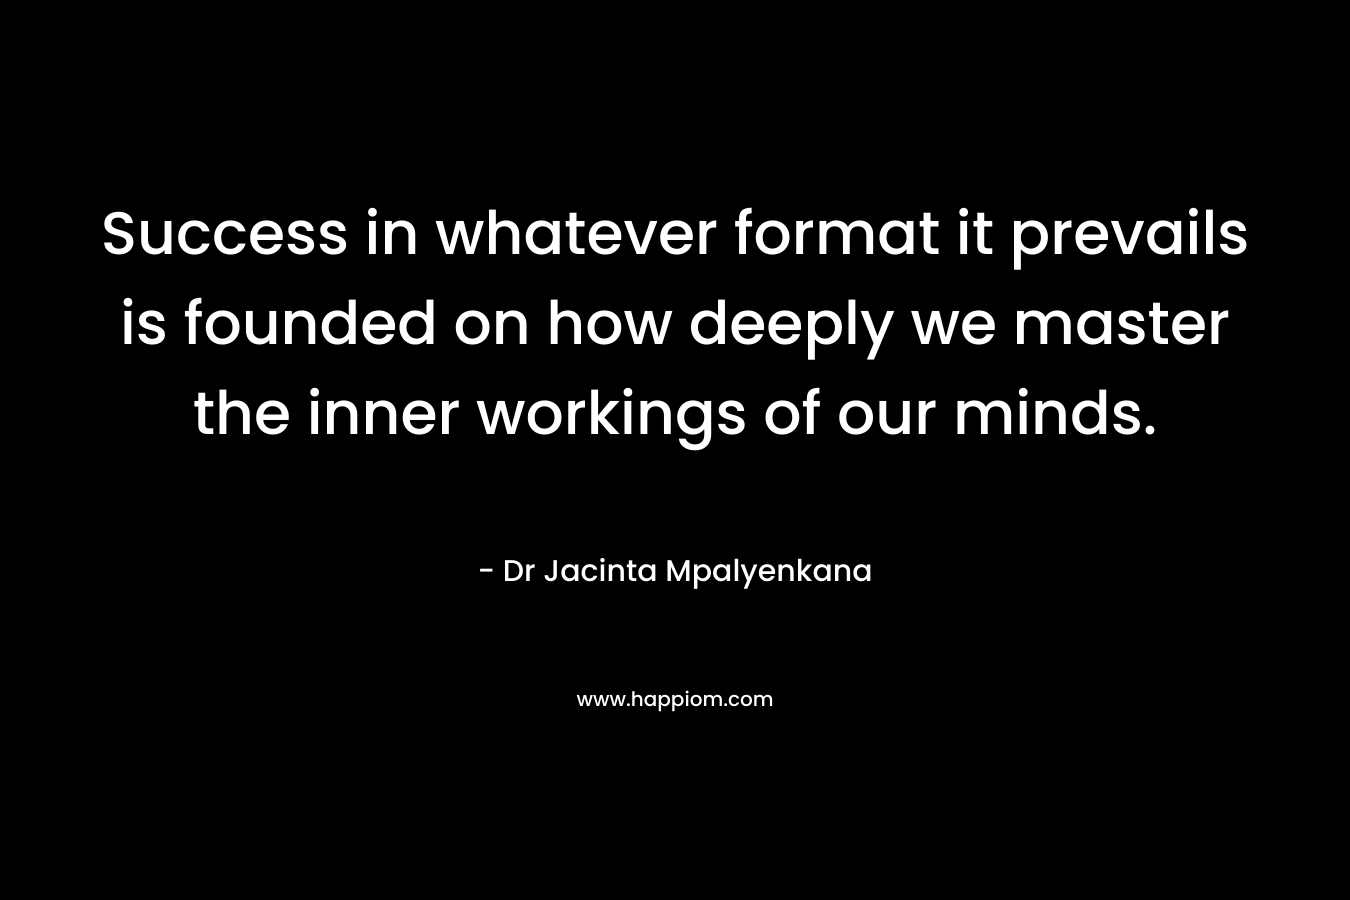 Success in whatever format it prevails is founded on how deeply we master the inner workings of our minds.